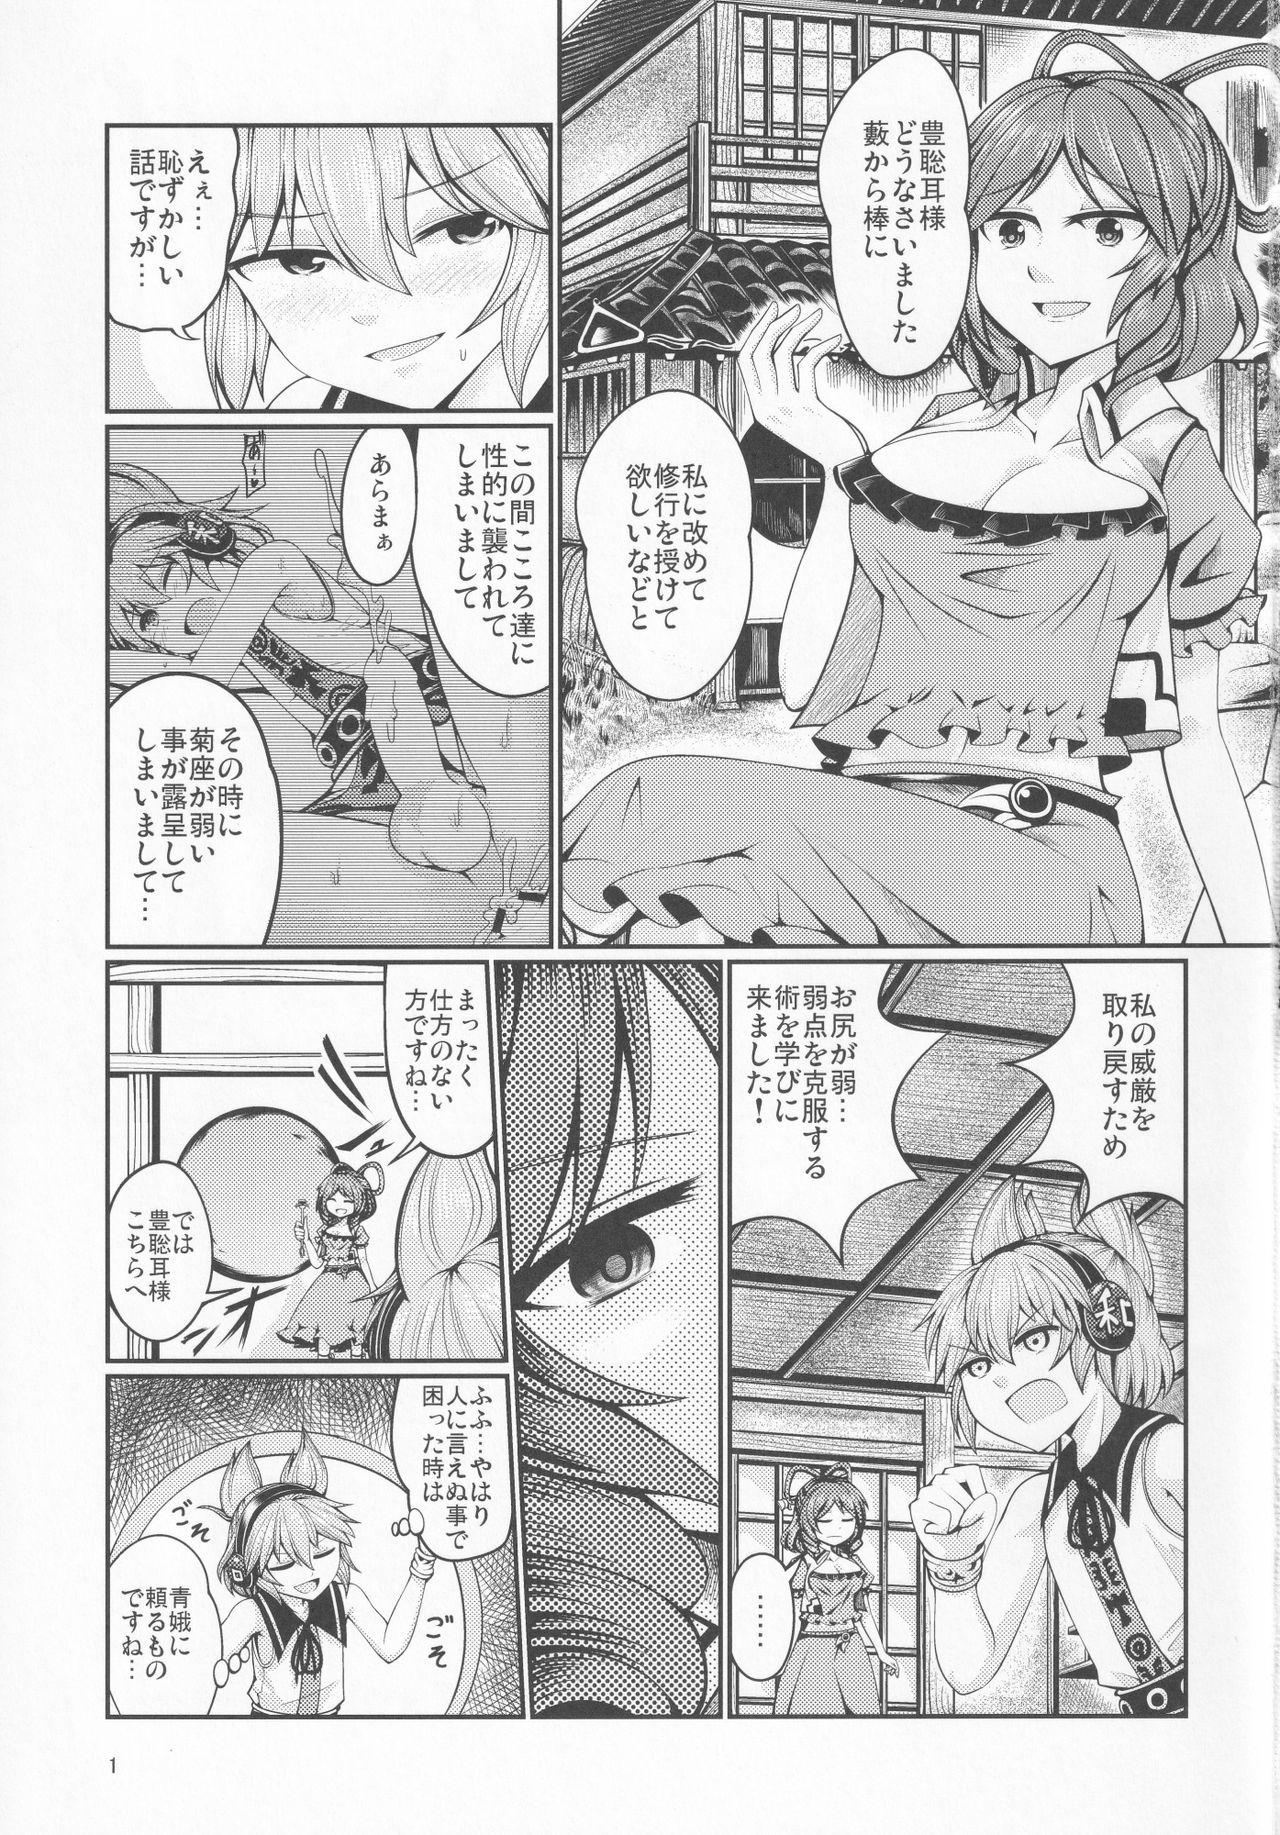 Lesbians Reverse Sexuality 4 - Touhou project White - Page 2